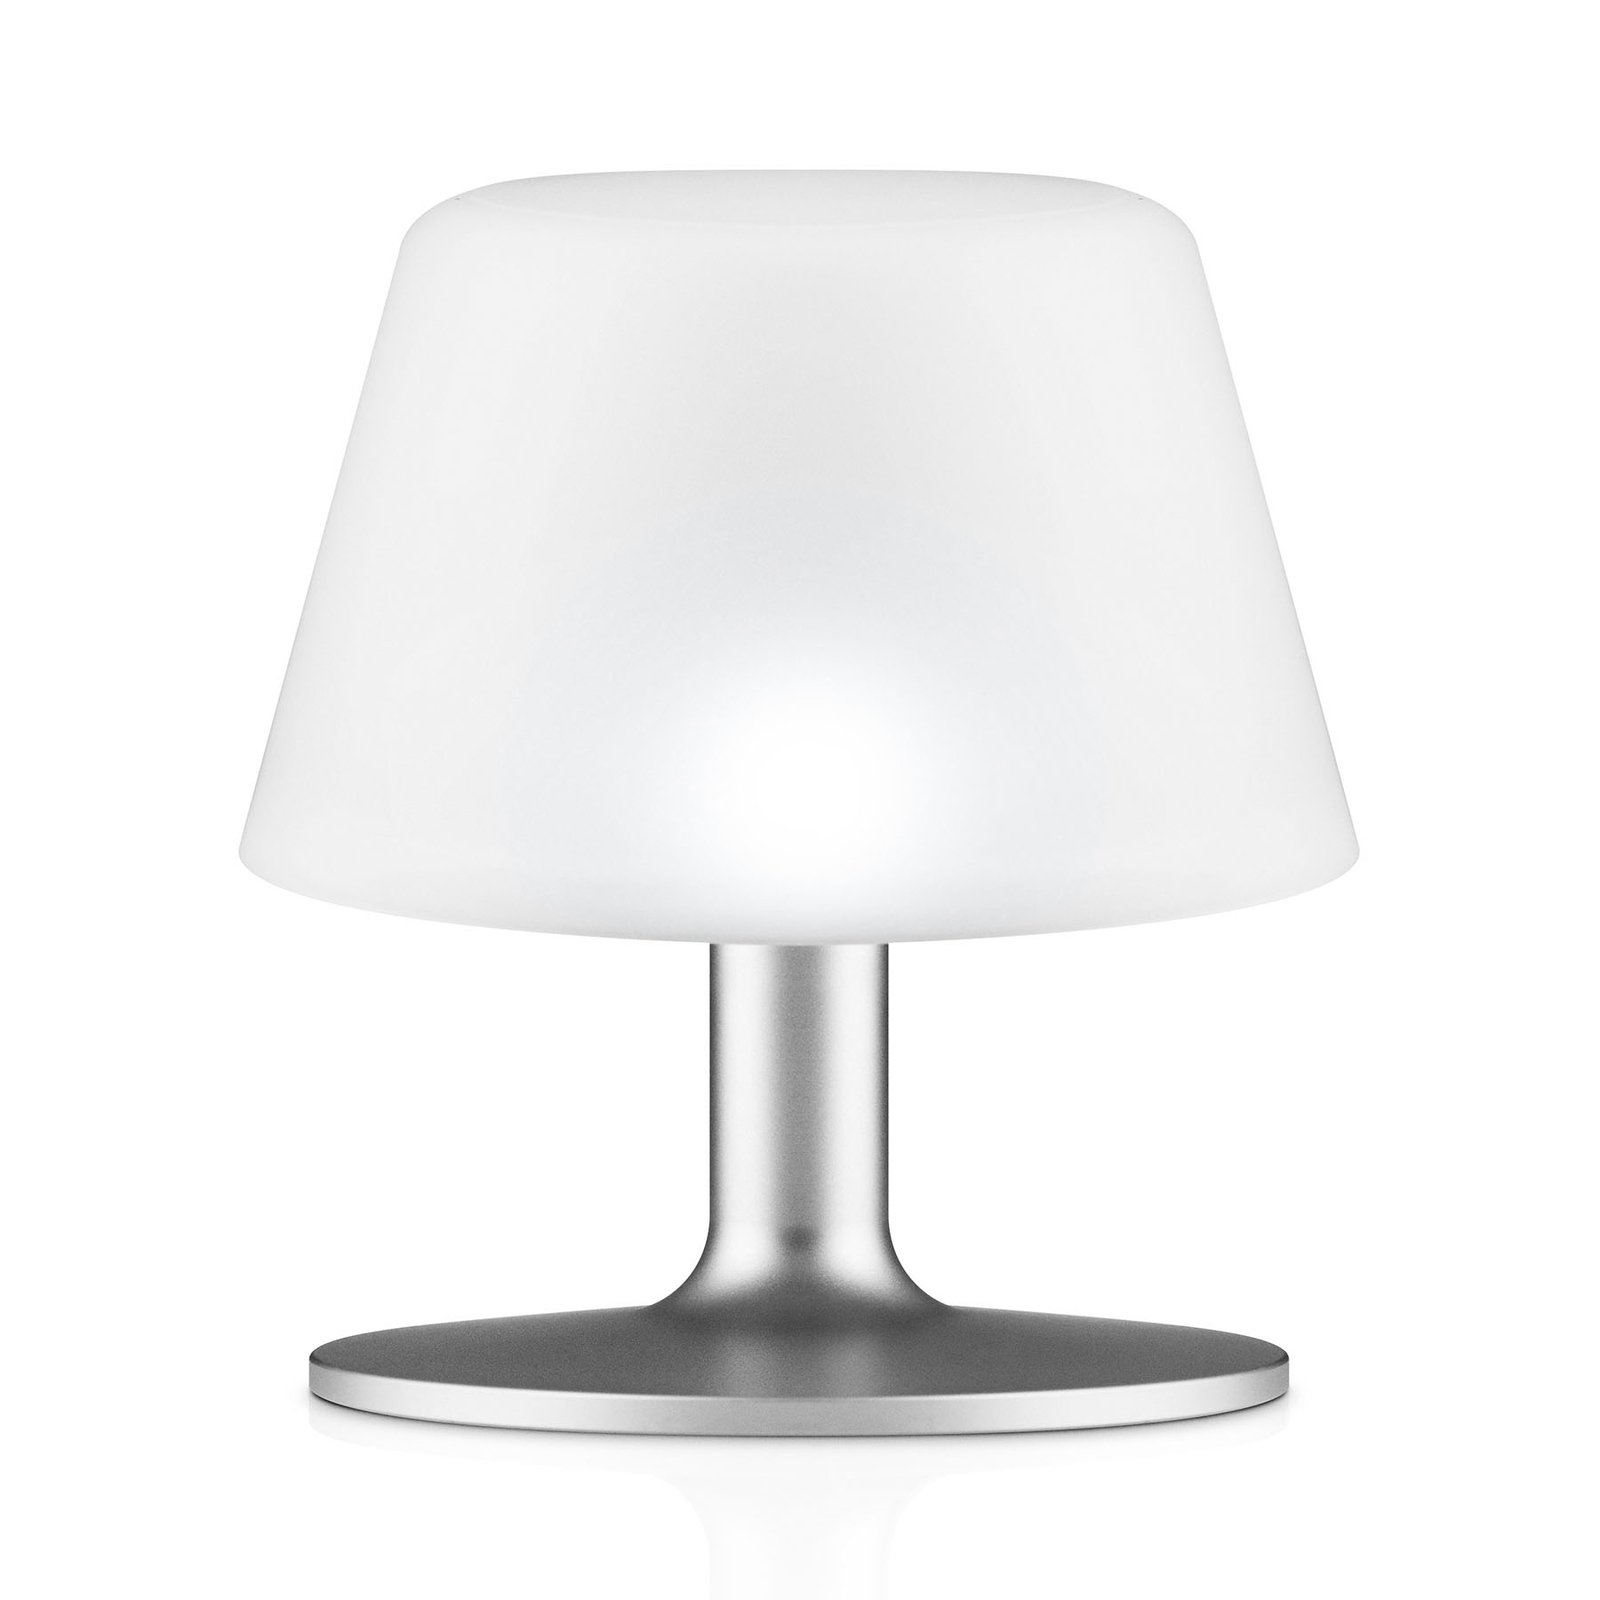 EVA Solo SunLight LED solar table lamp frosted